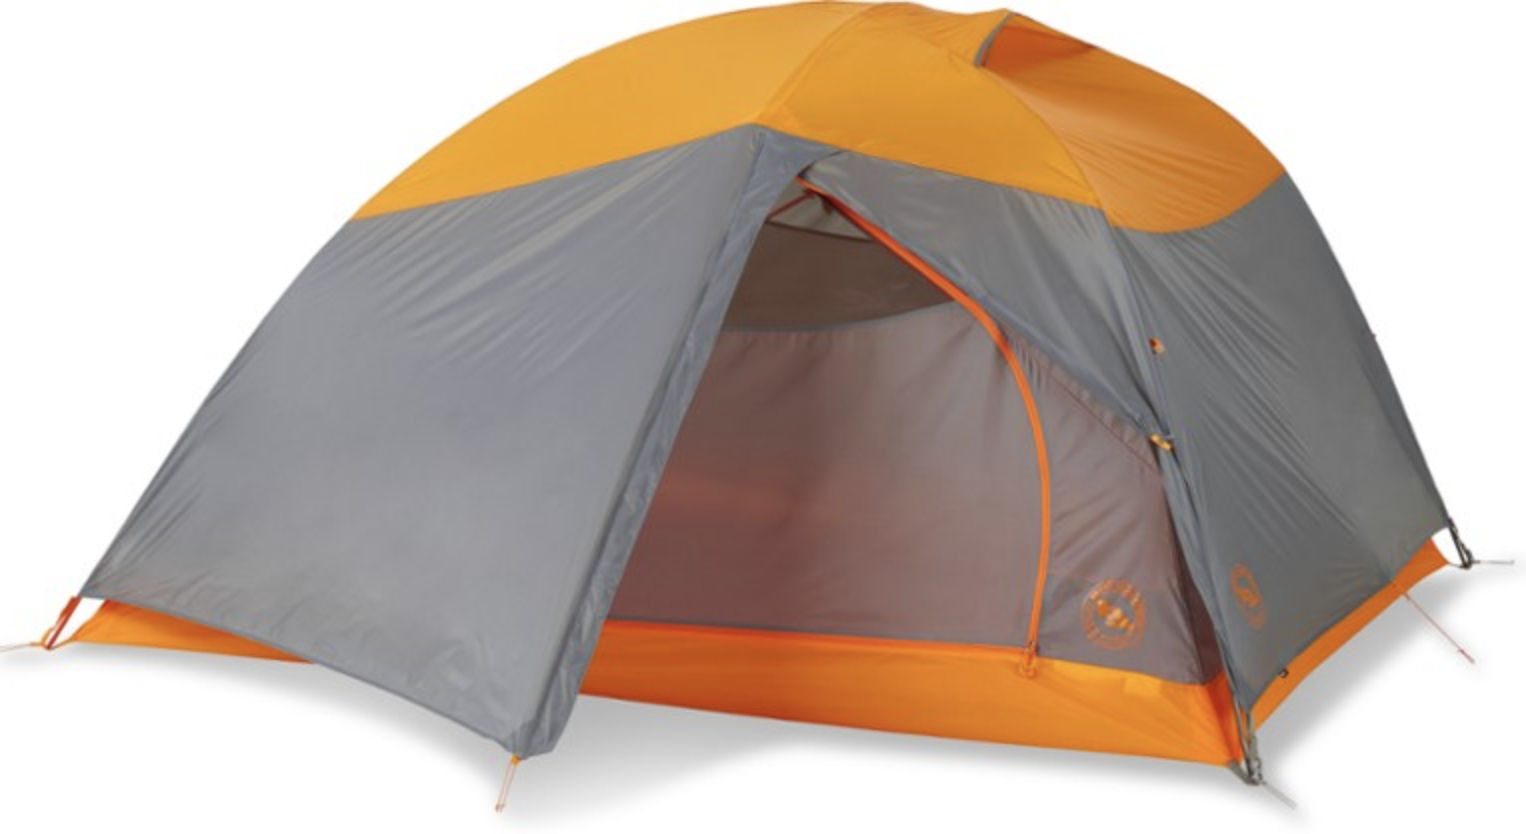 orange and grey tent with rain fly